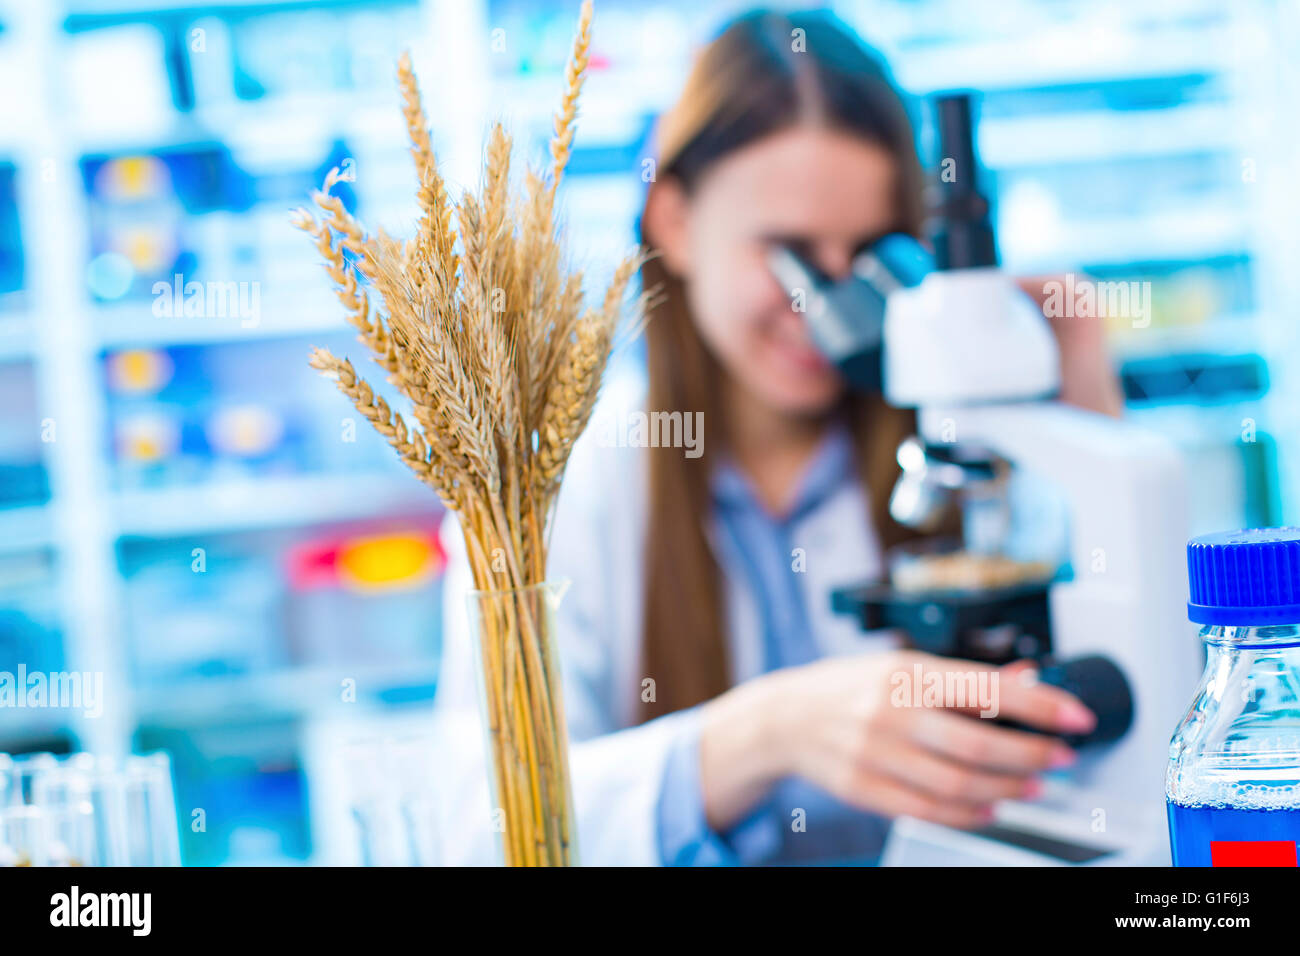 MODEL RELEASED. Female nutritionist using microscope in the laboratory. Stock Photo